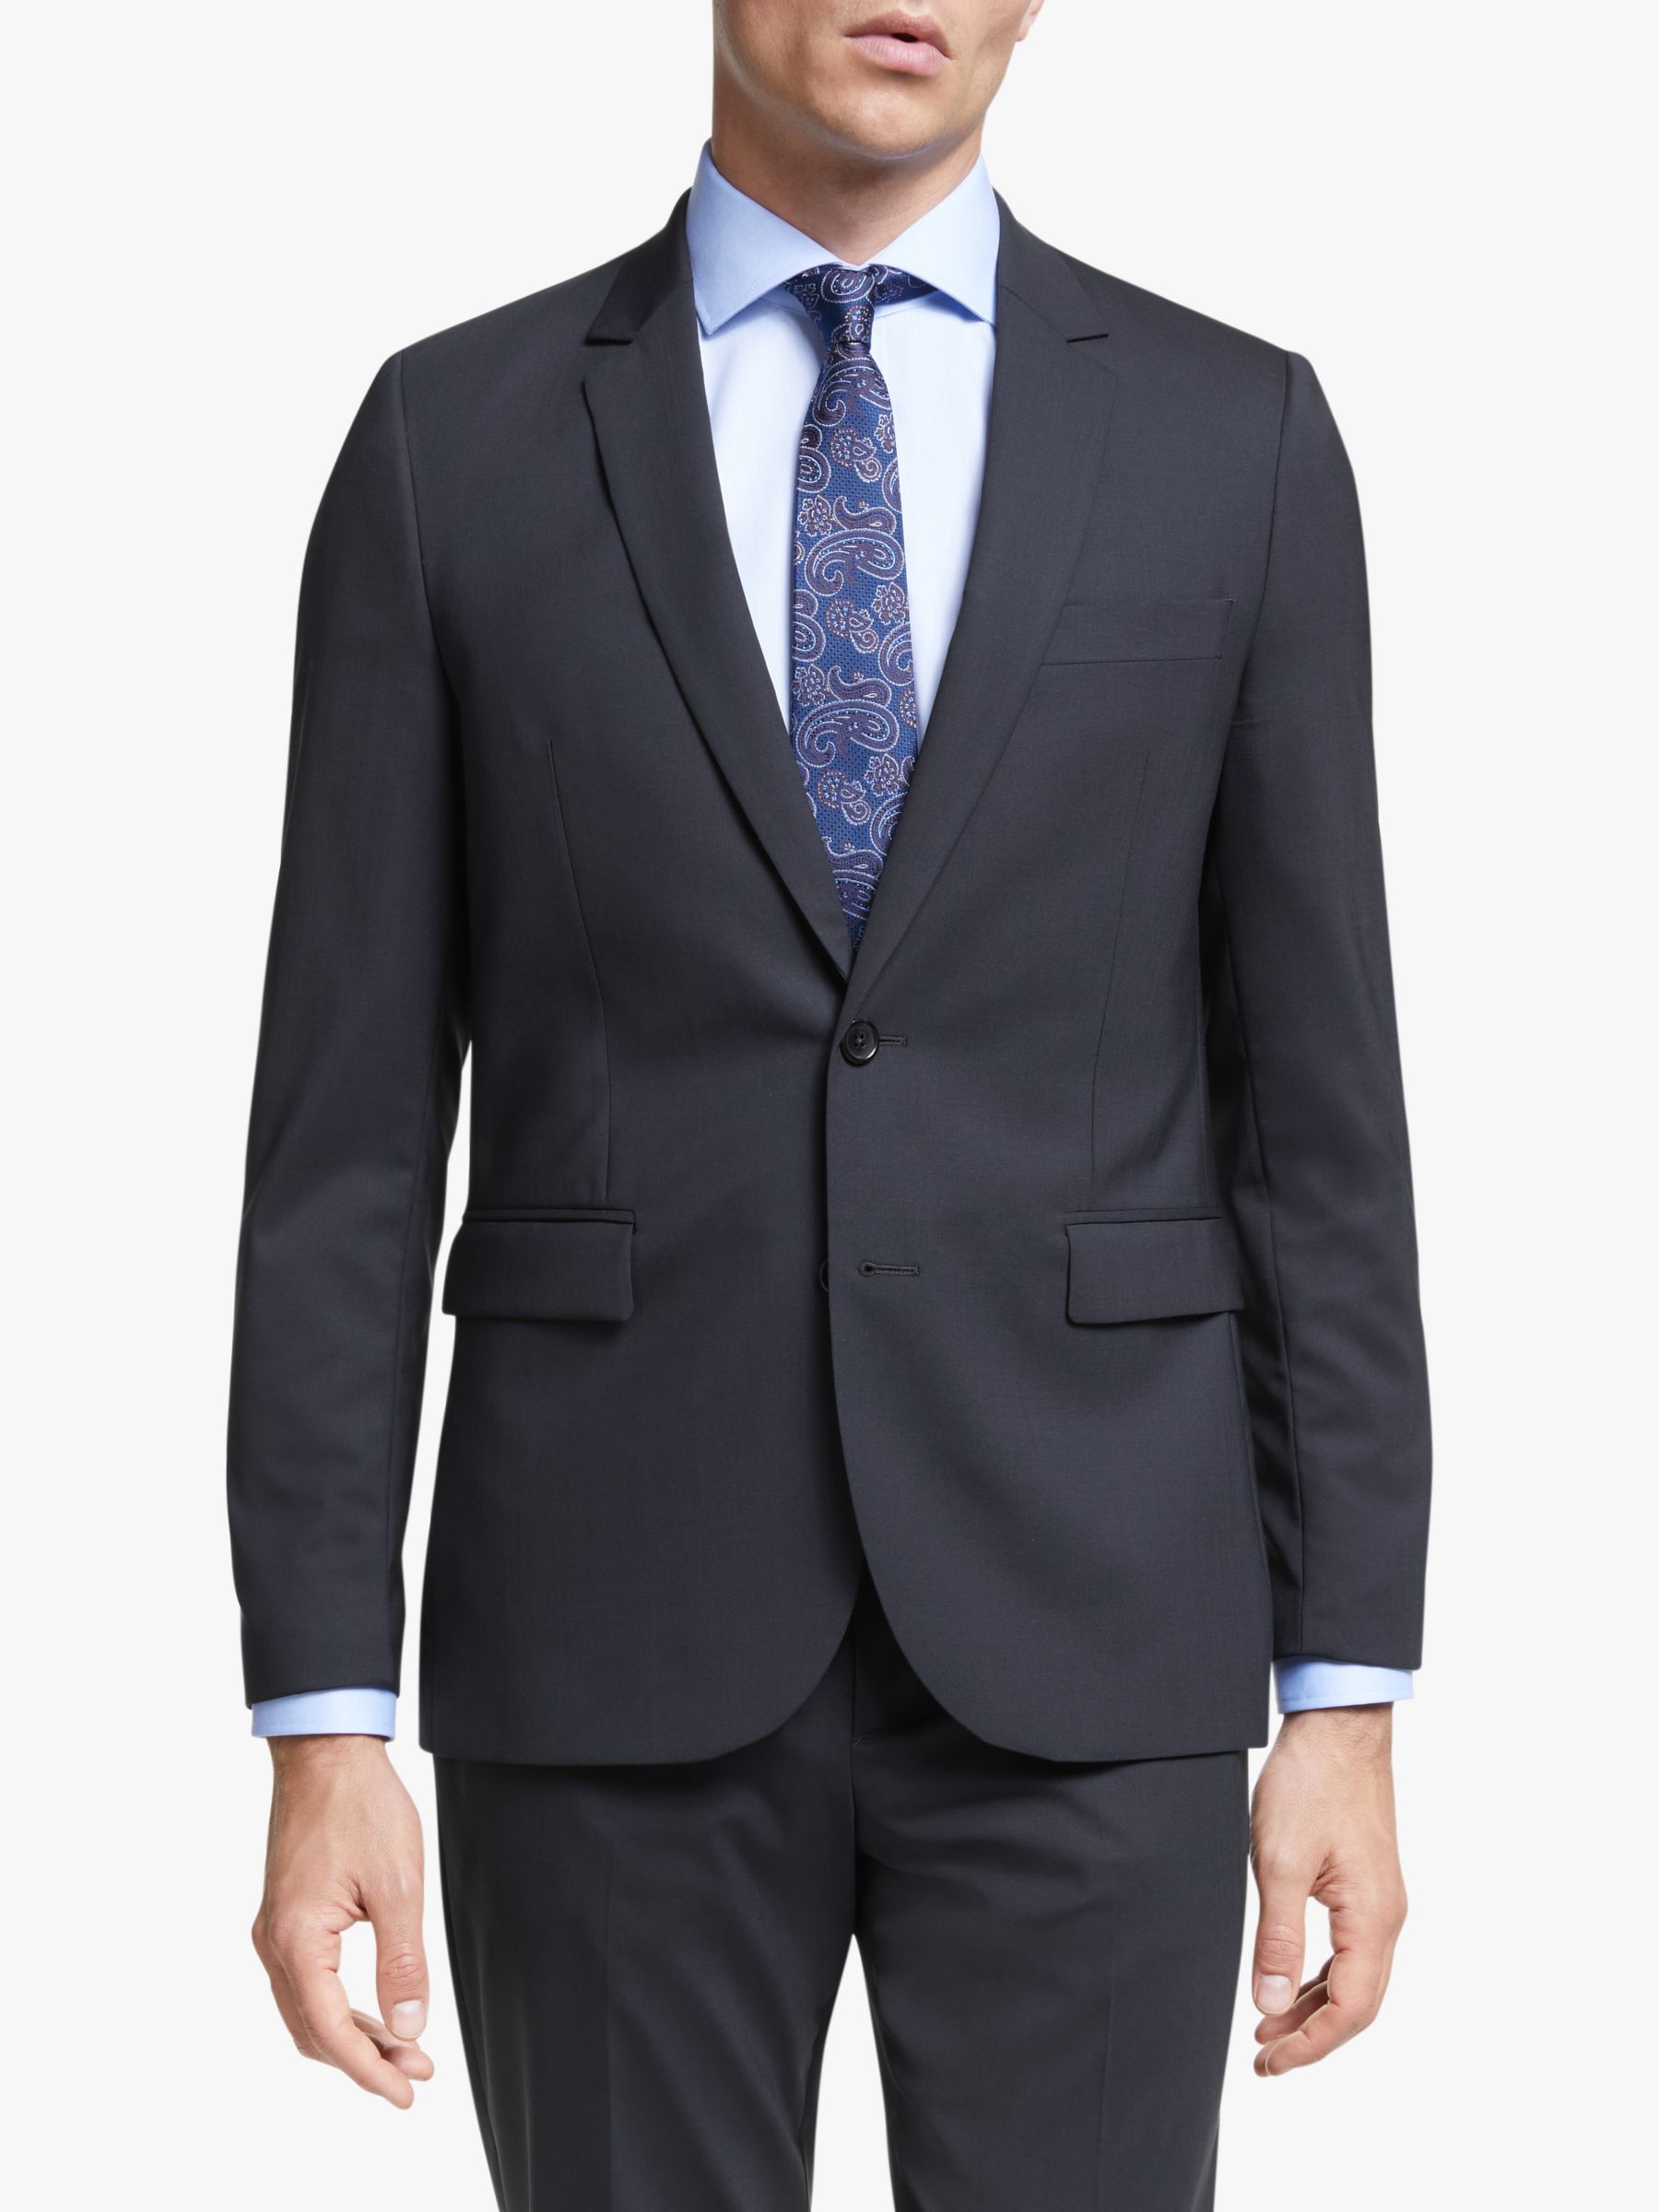 Paul Smith Wool Stretch Tailored Fit Suit Jacket, Navy